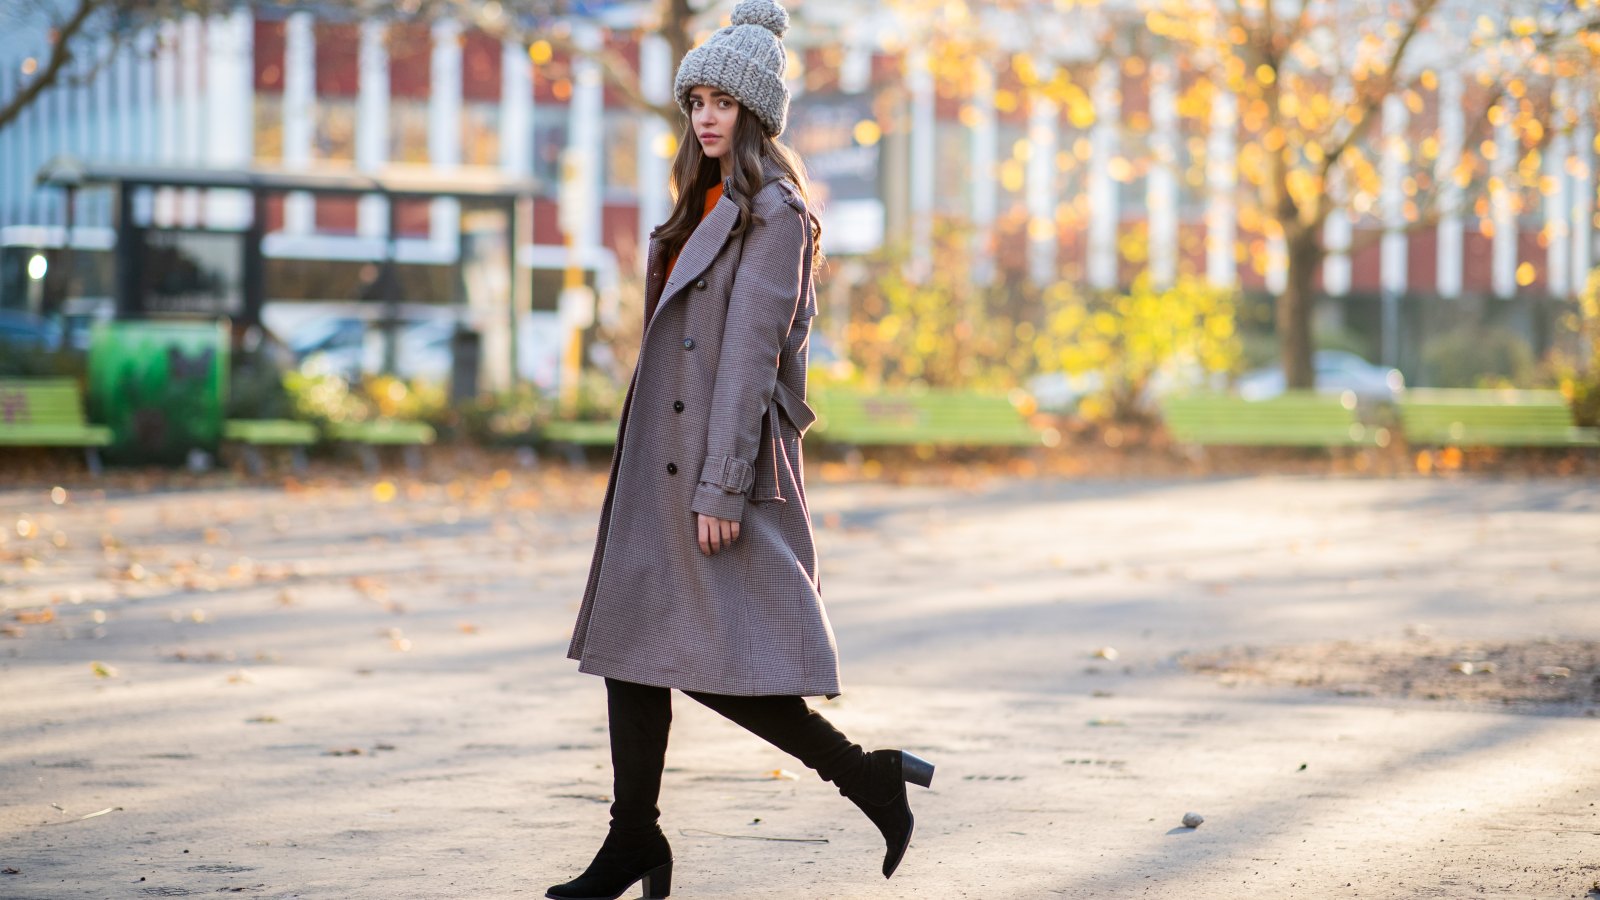 woman wearing boots, a trench coat and knit cap